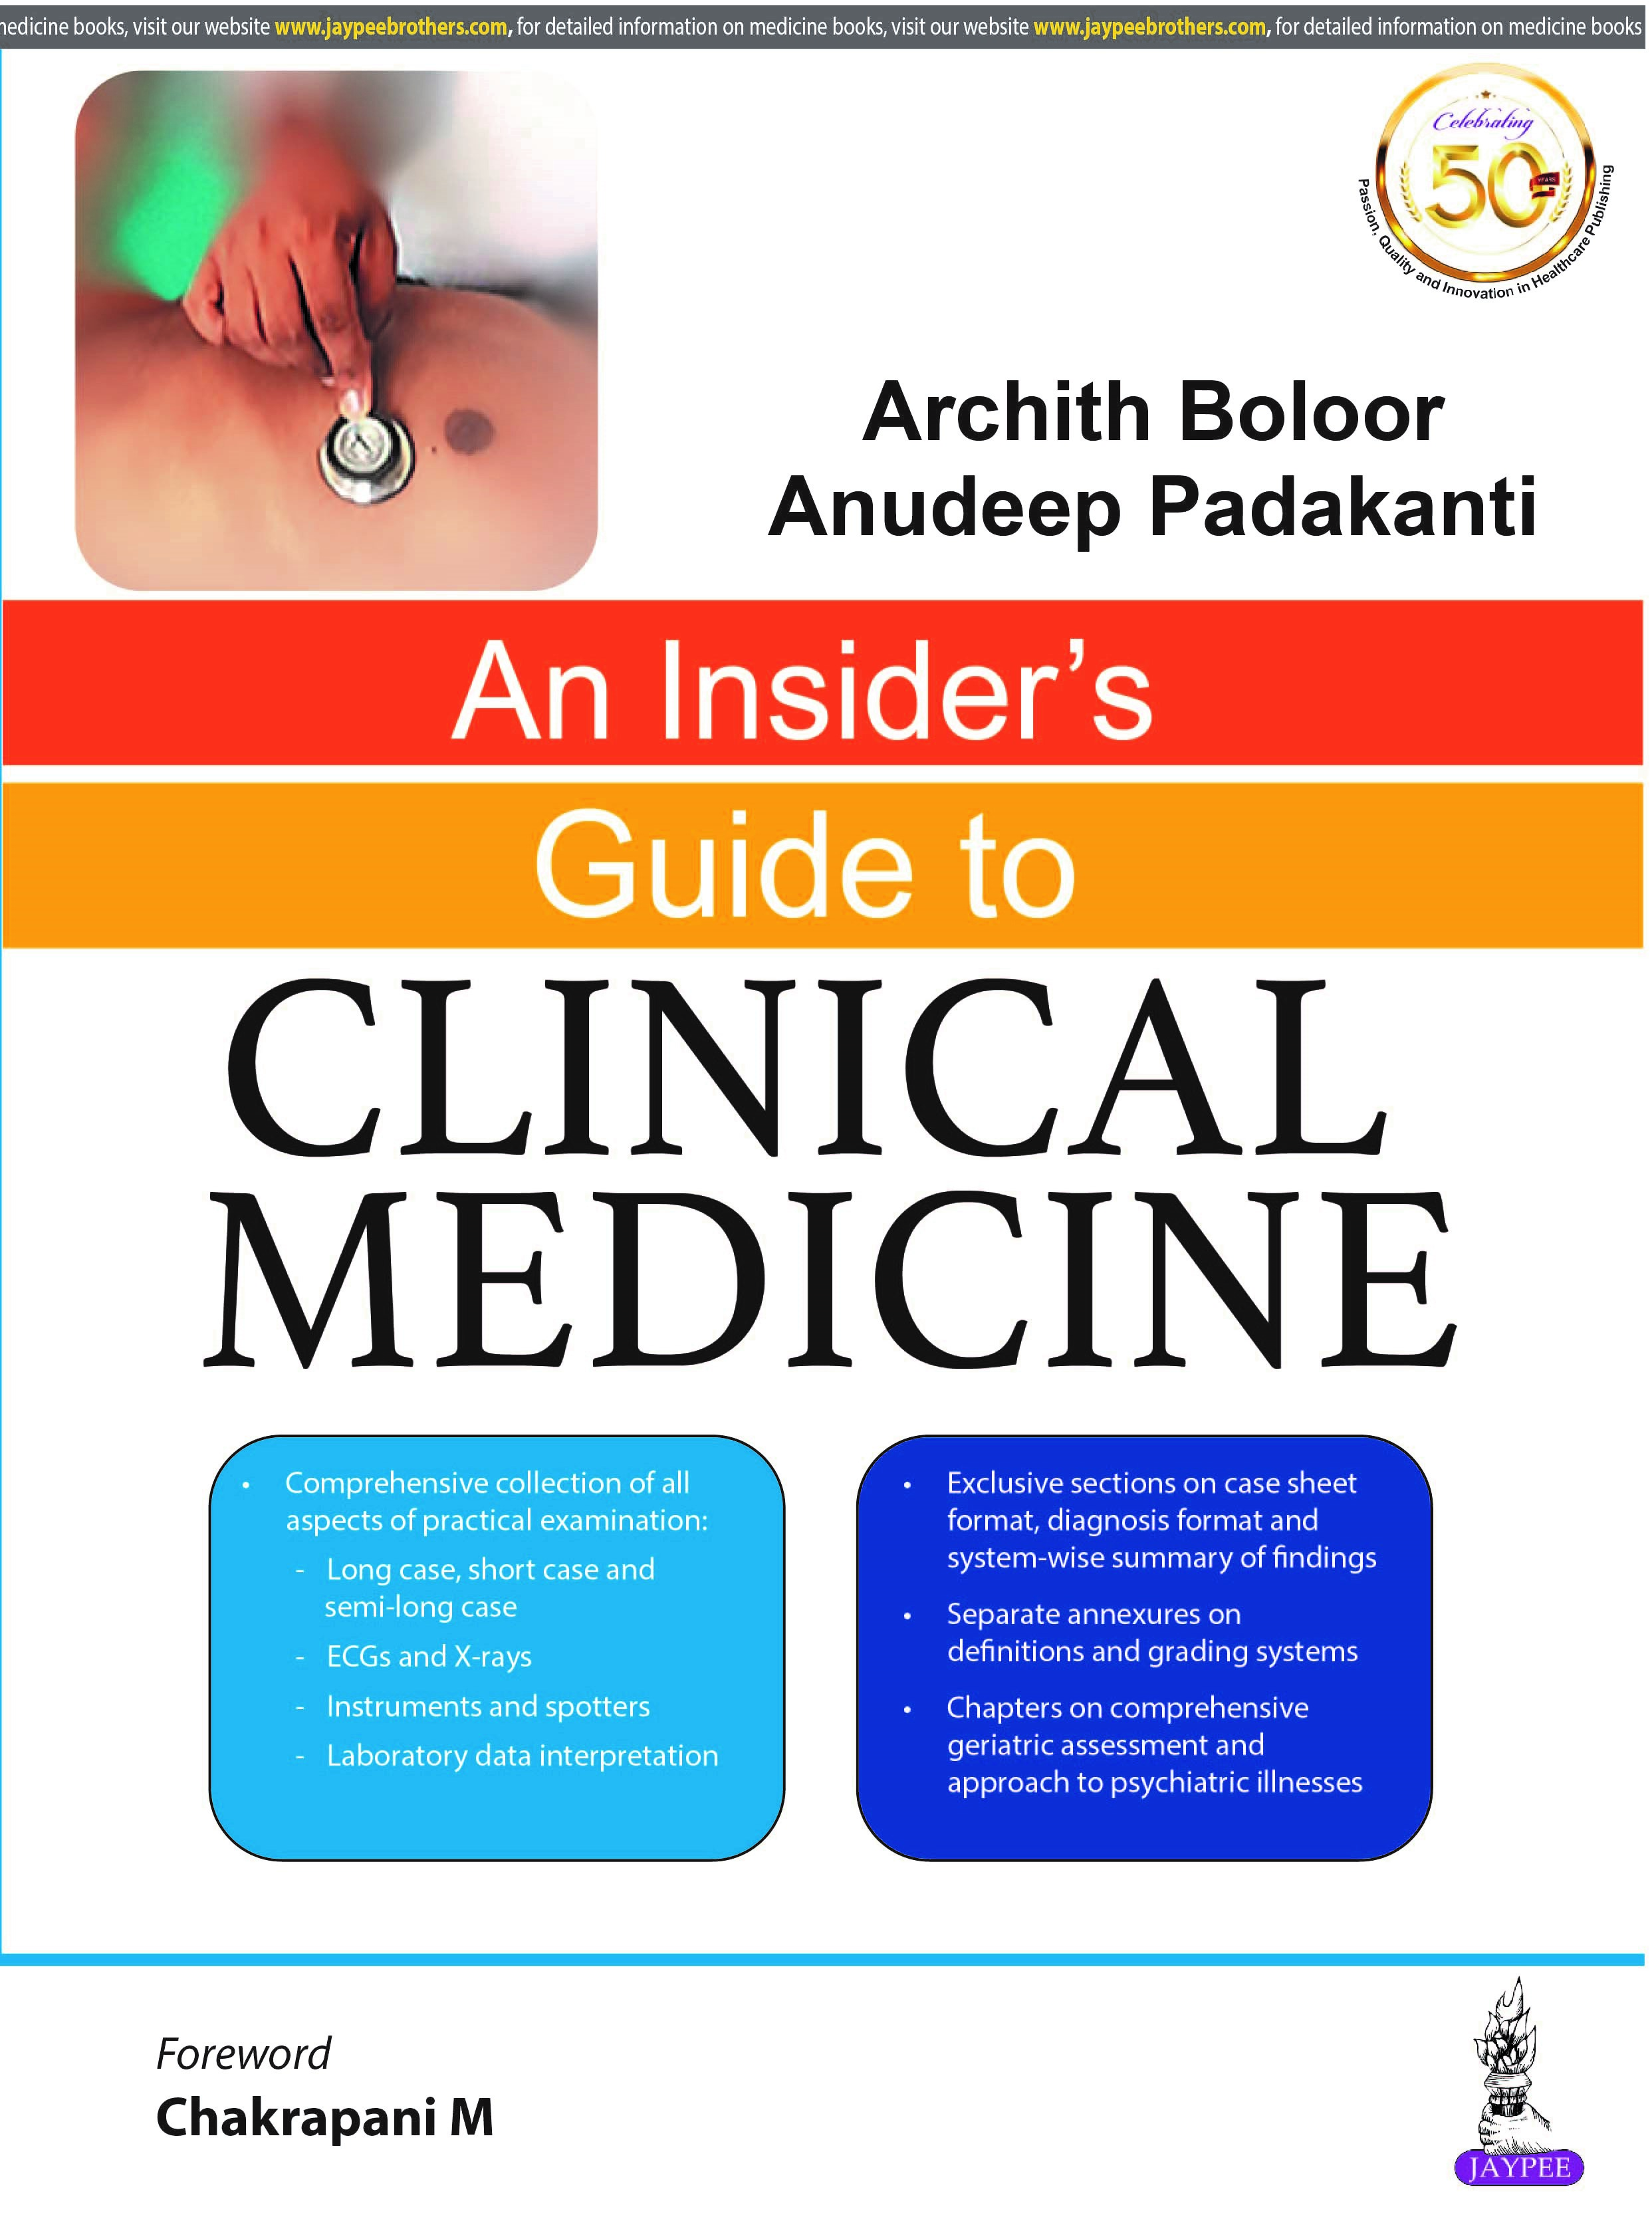 An Insider's Guide to Clinical Medicine